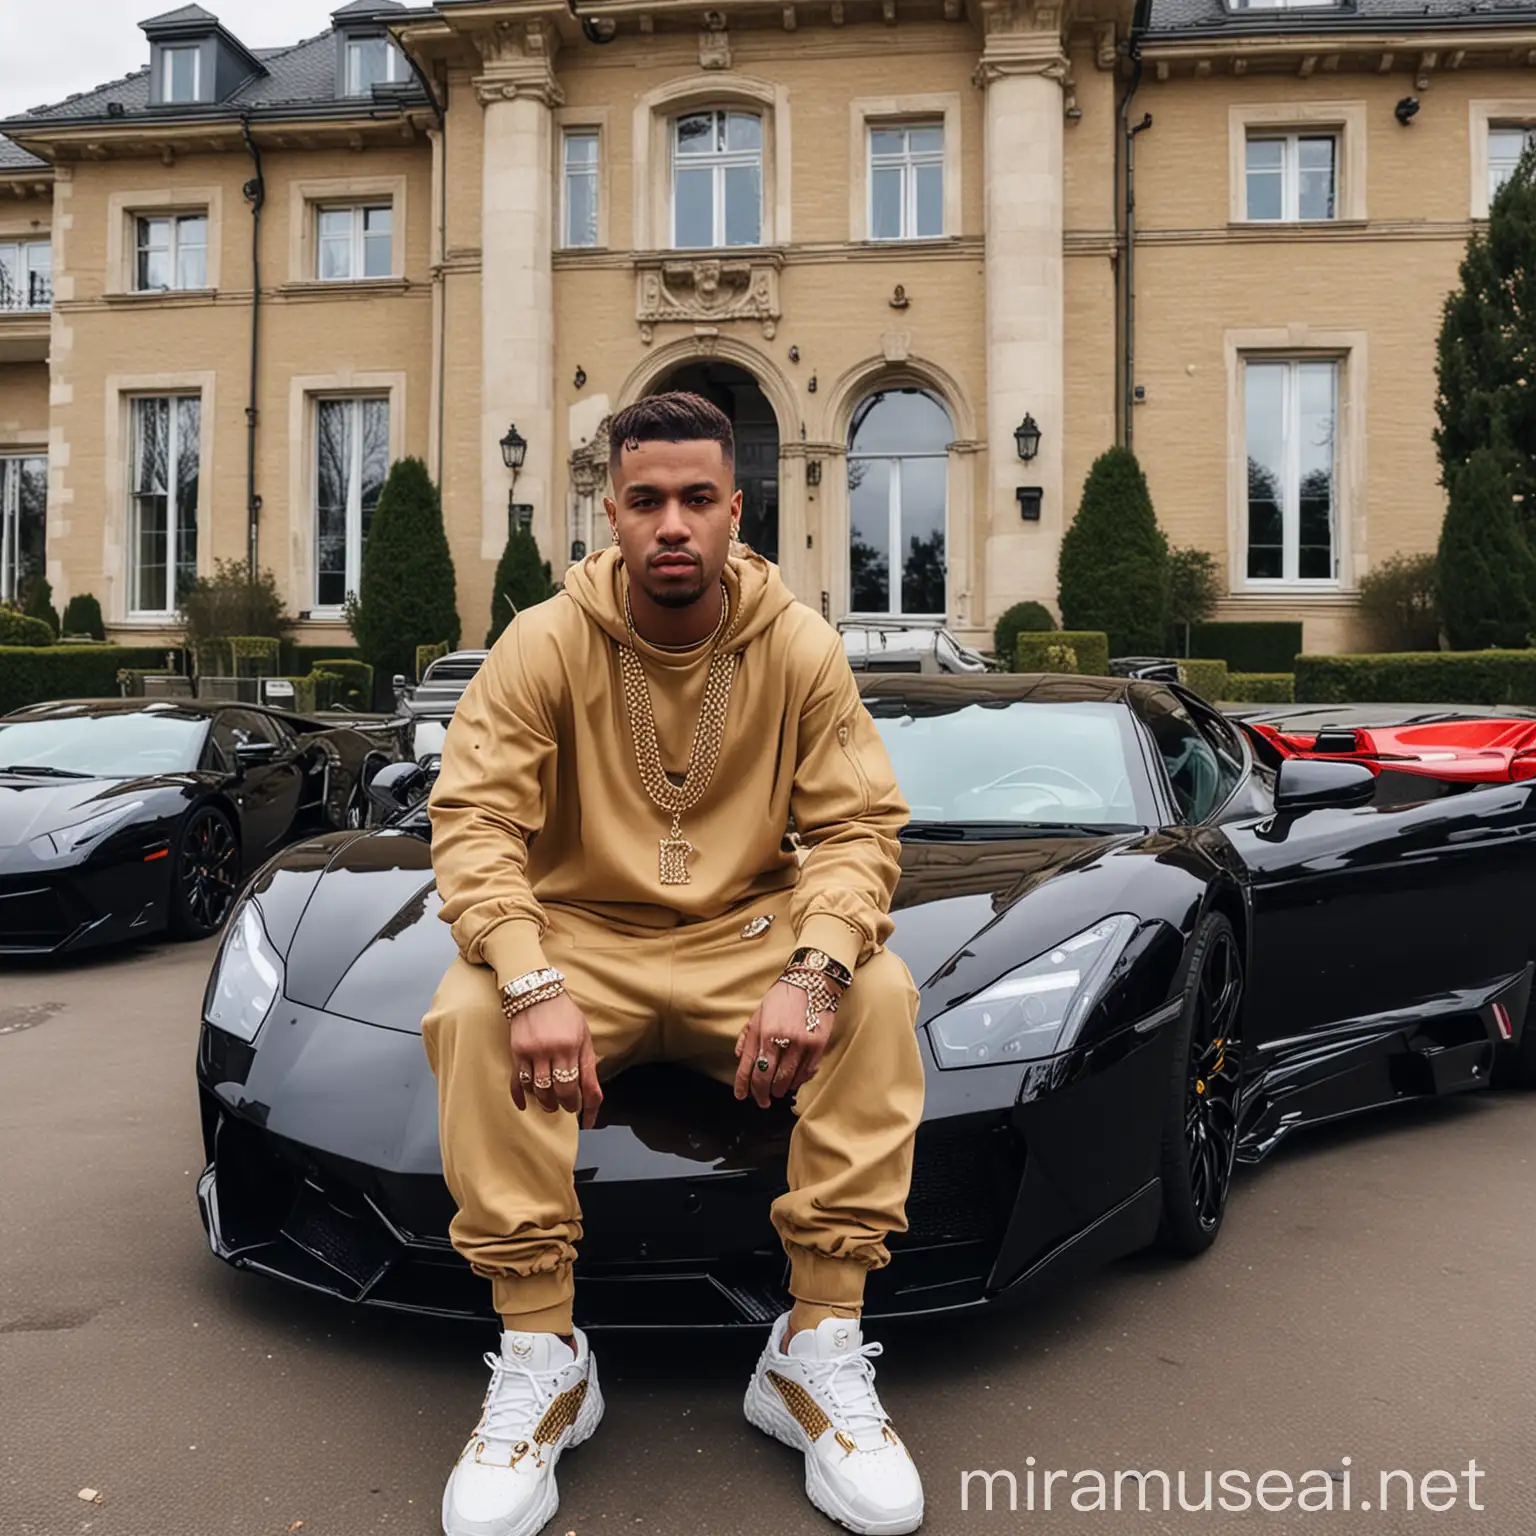 Belgian rapper with jewelry Infront of his mansion and expensive supercars